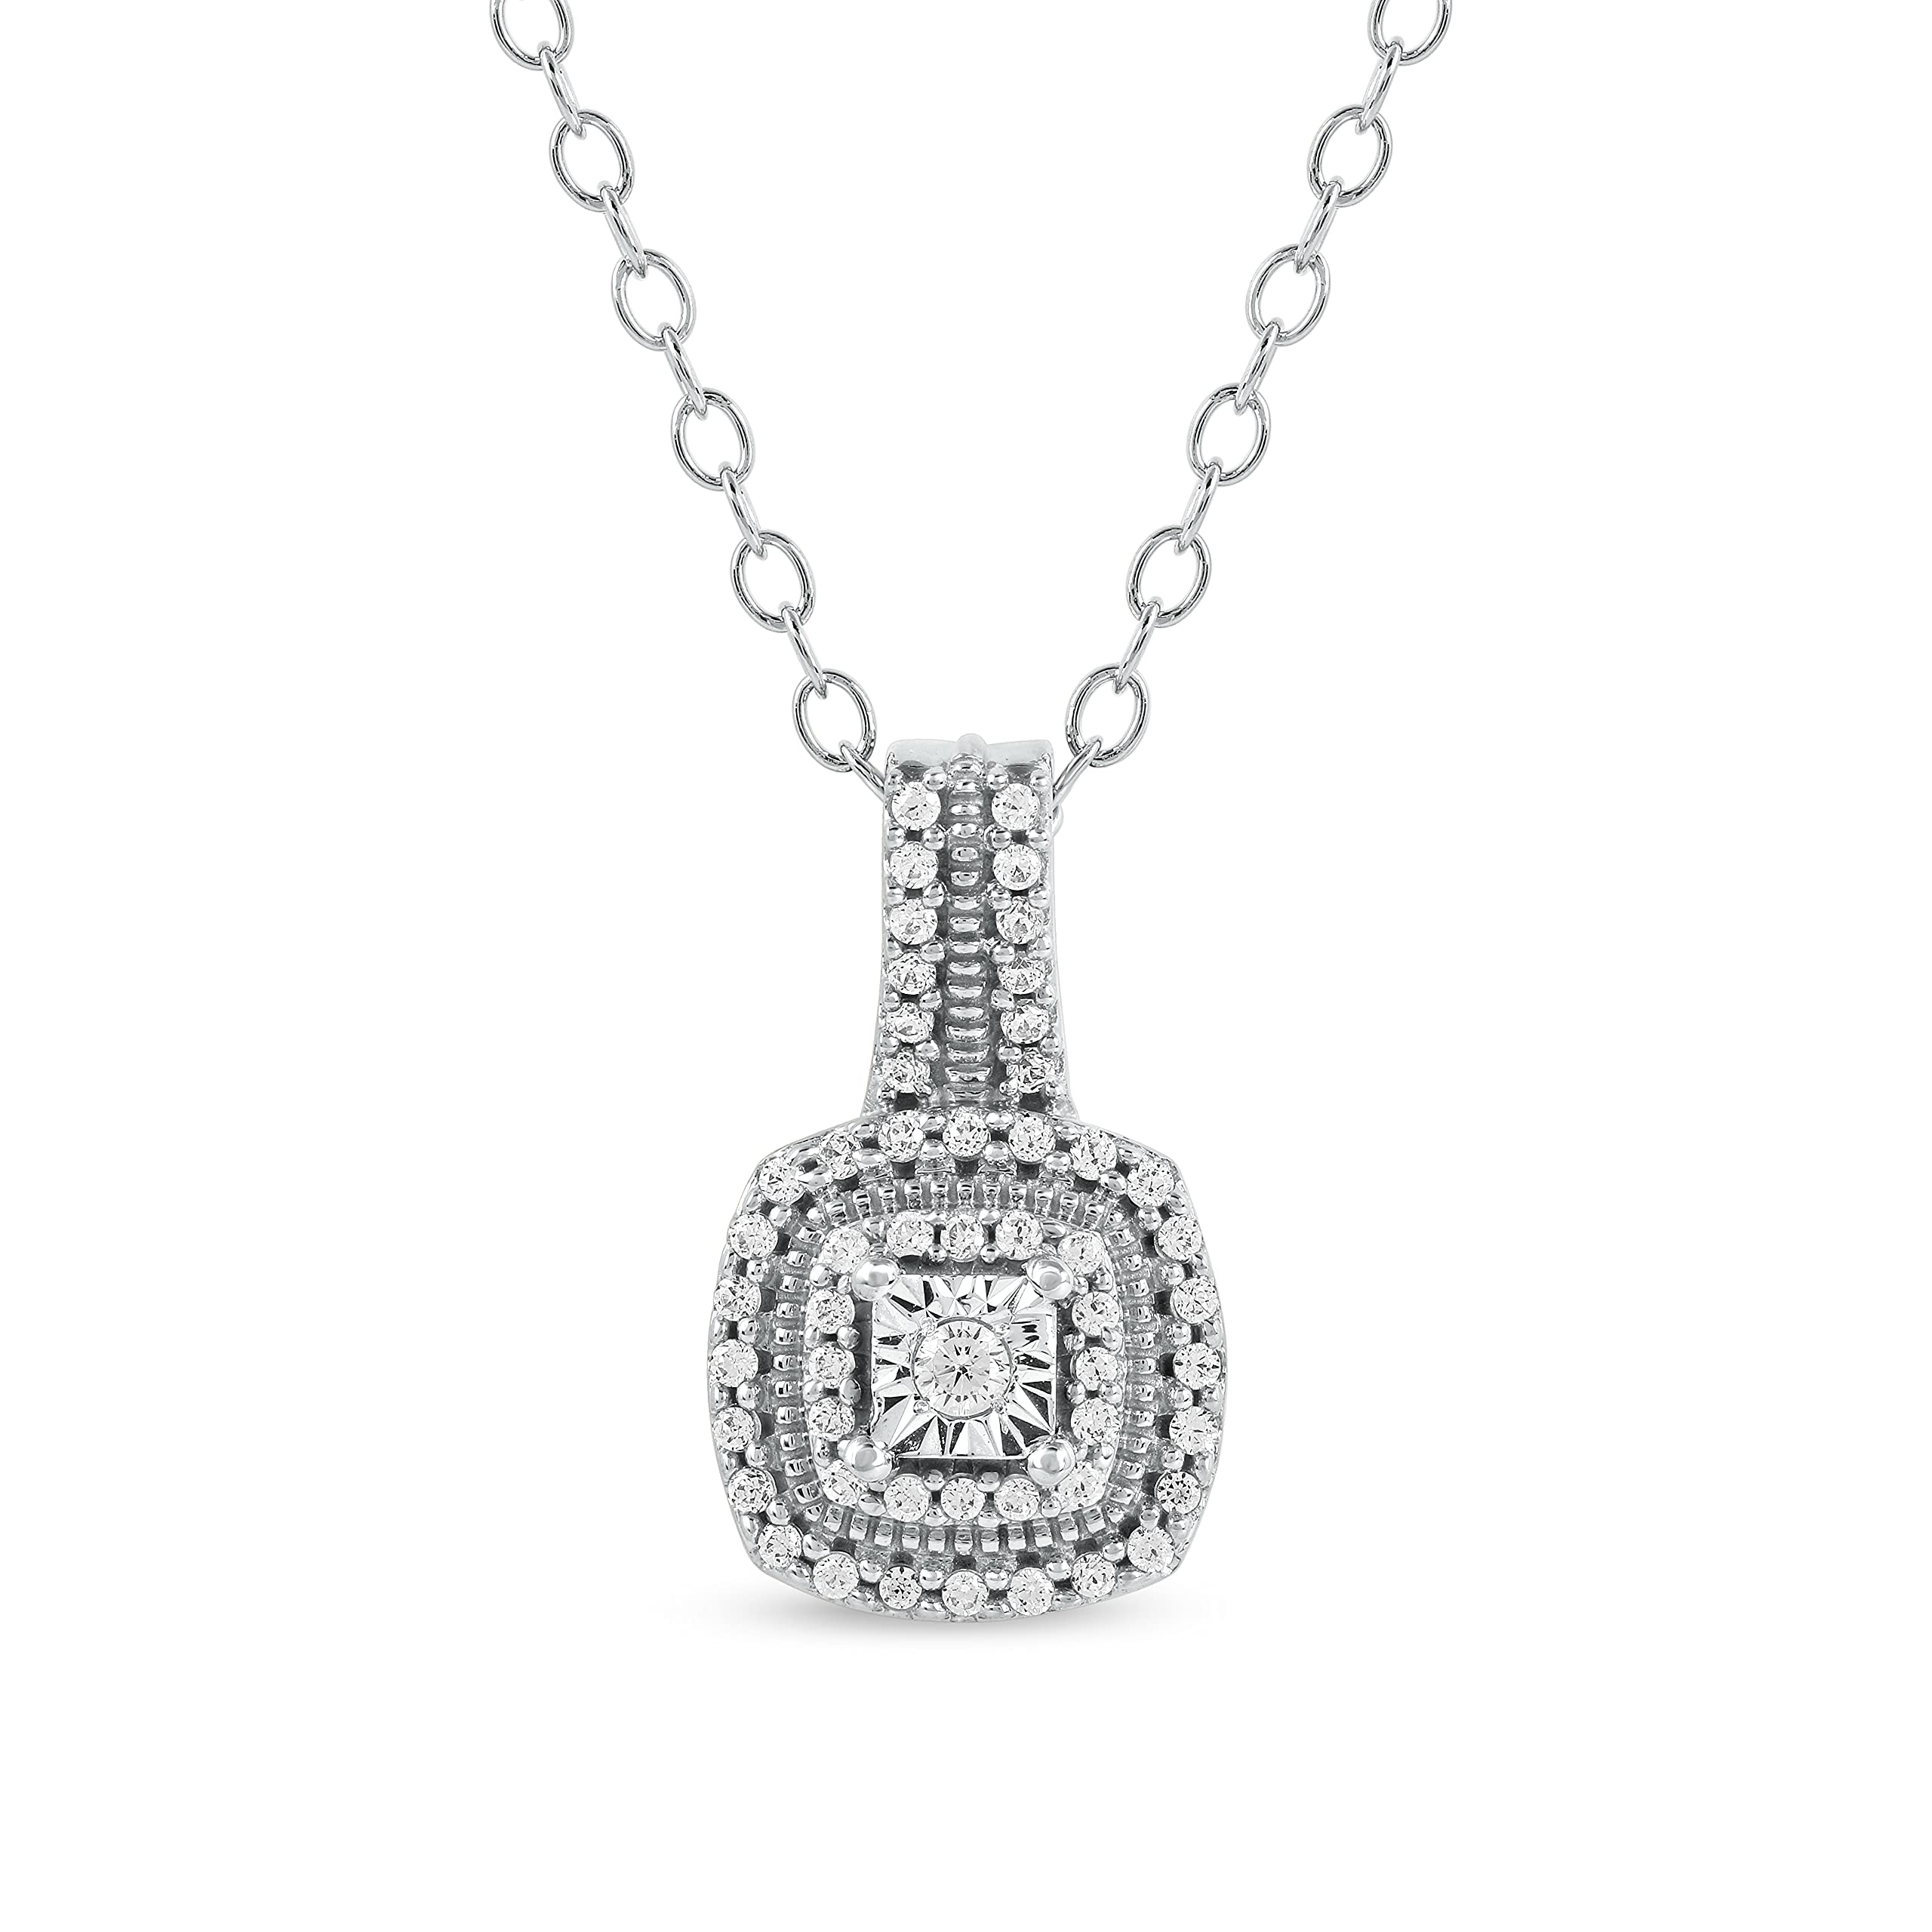 DZON Sterling Silver 1/6ct TDW Round-Cut Diamond Cushion Halo Composite Pendant Necklace Love Jewelry for Women Girl (I-J, I2)